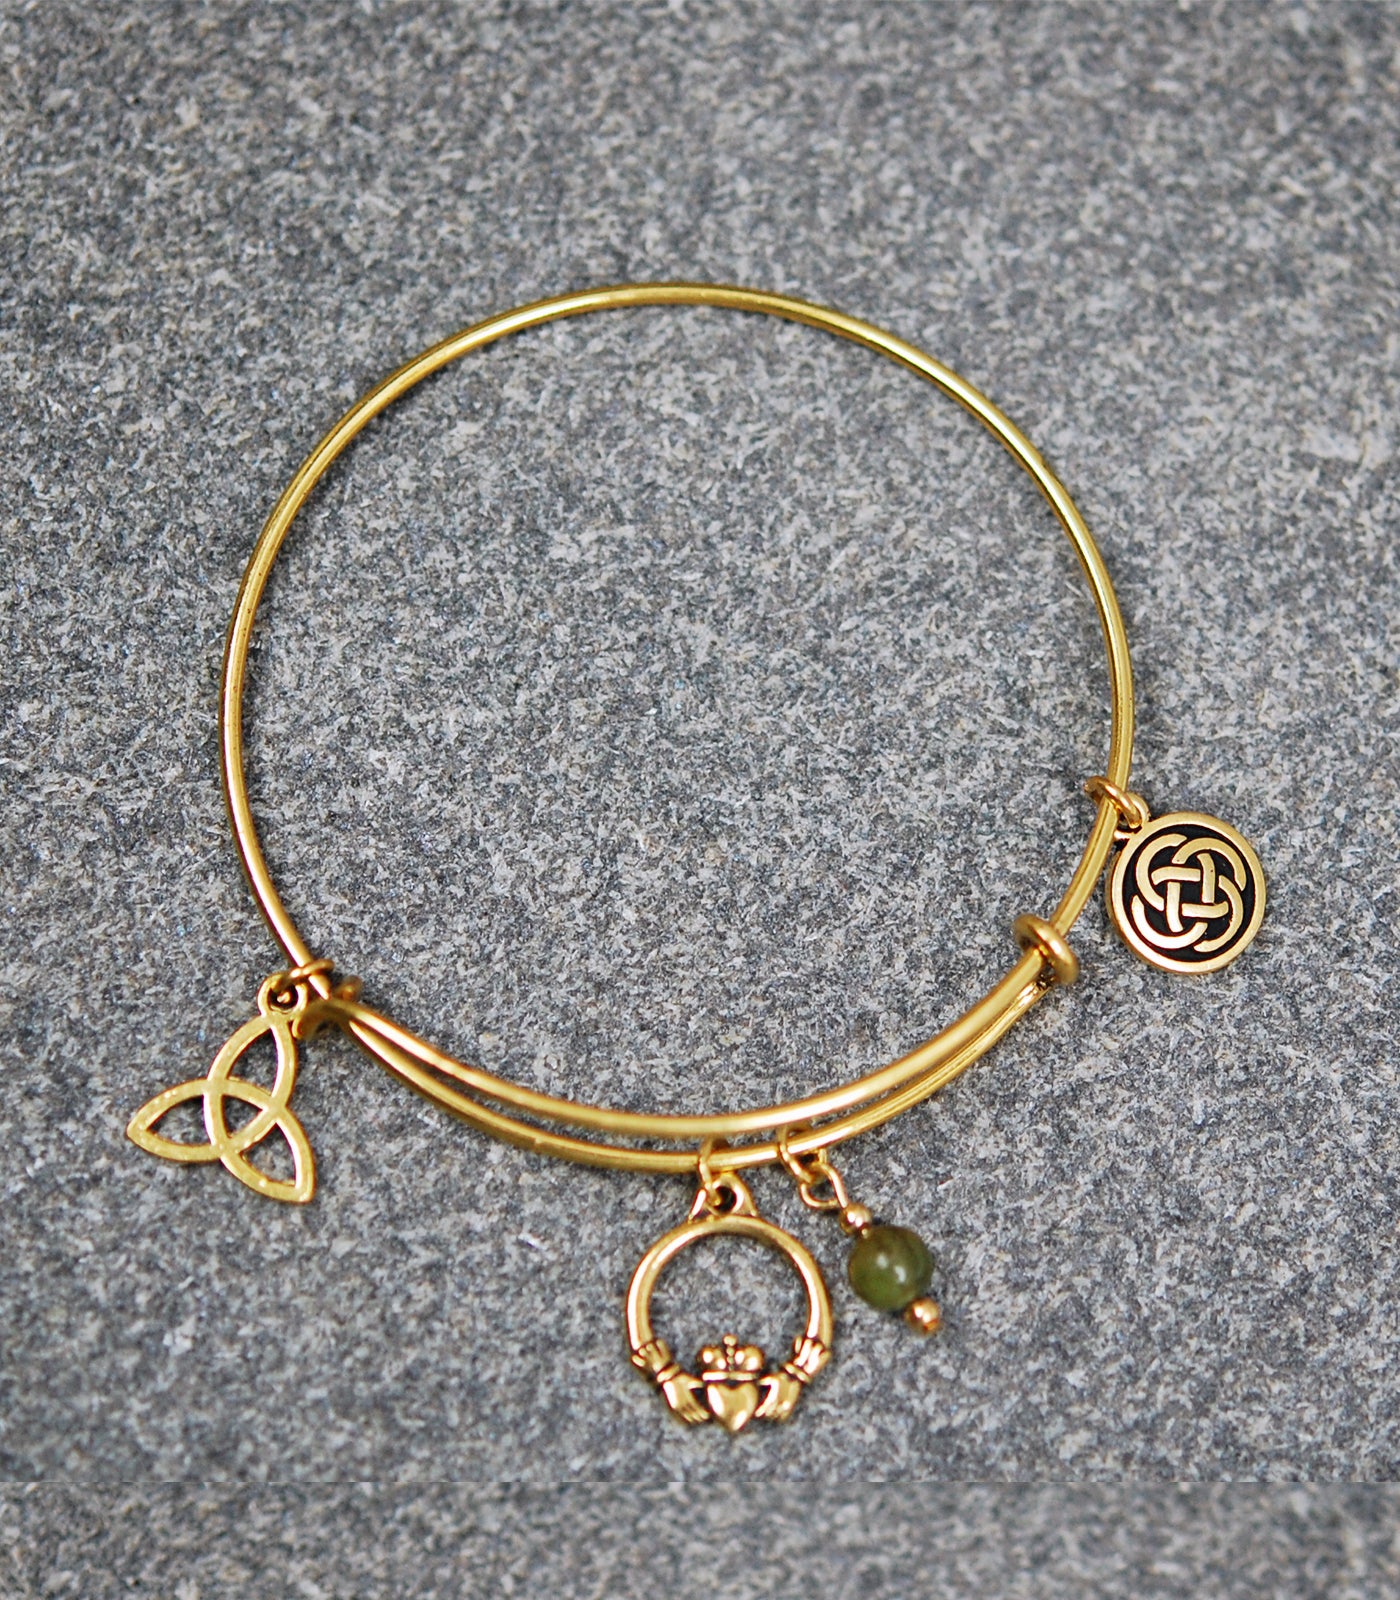 Connemara Marble Wire Bracelet with Claddagh